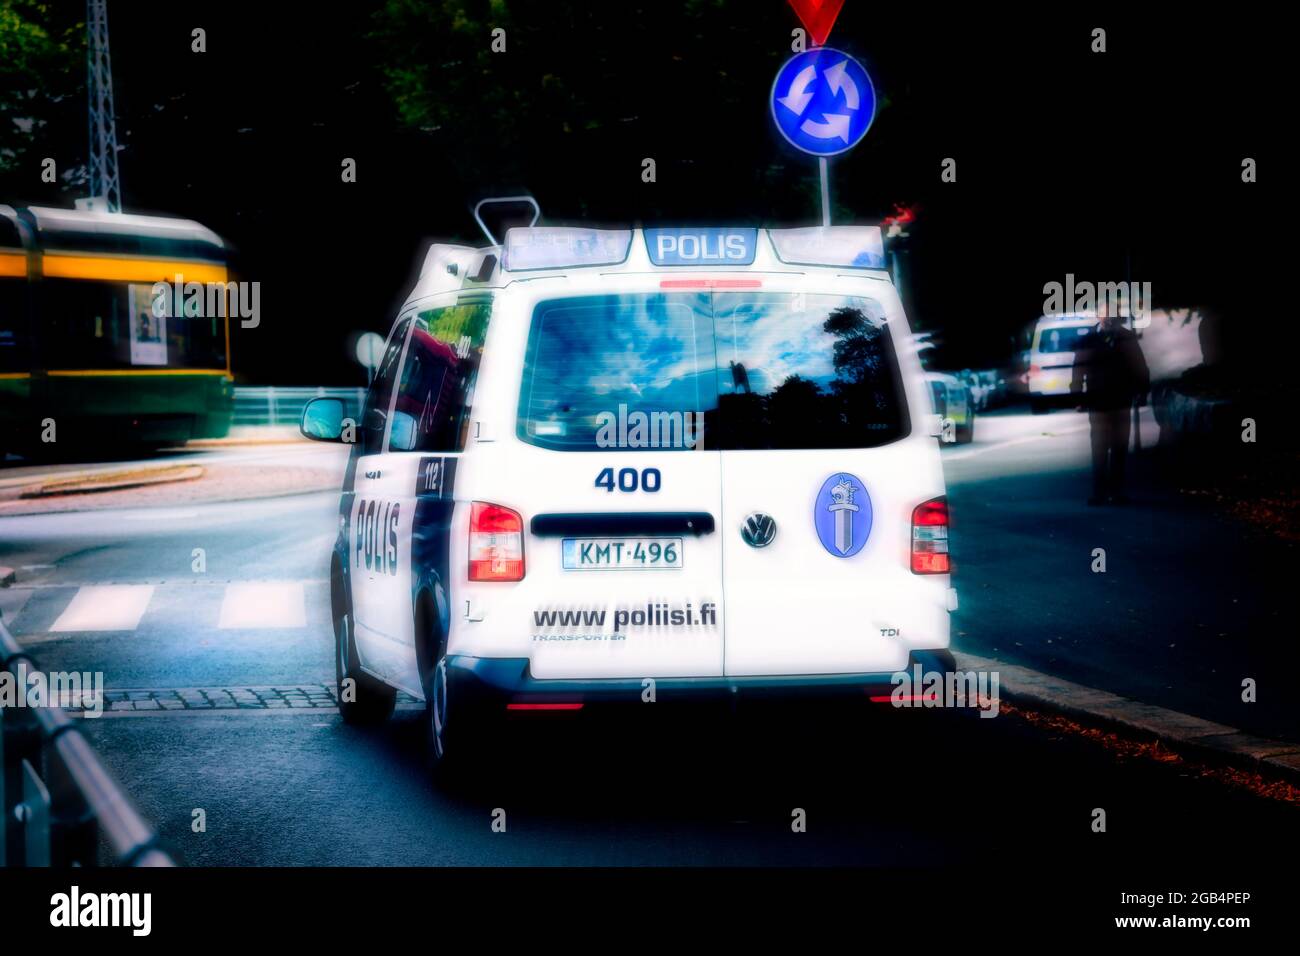 Volkswagen Transporter Police Vehicle at speed on the street, motion blur, illustrative editorial image. Stock Photo